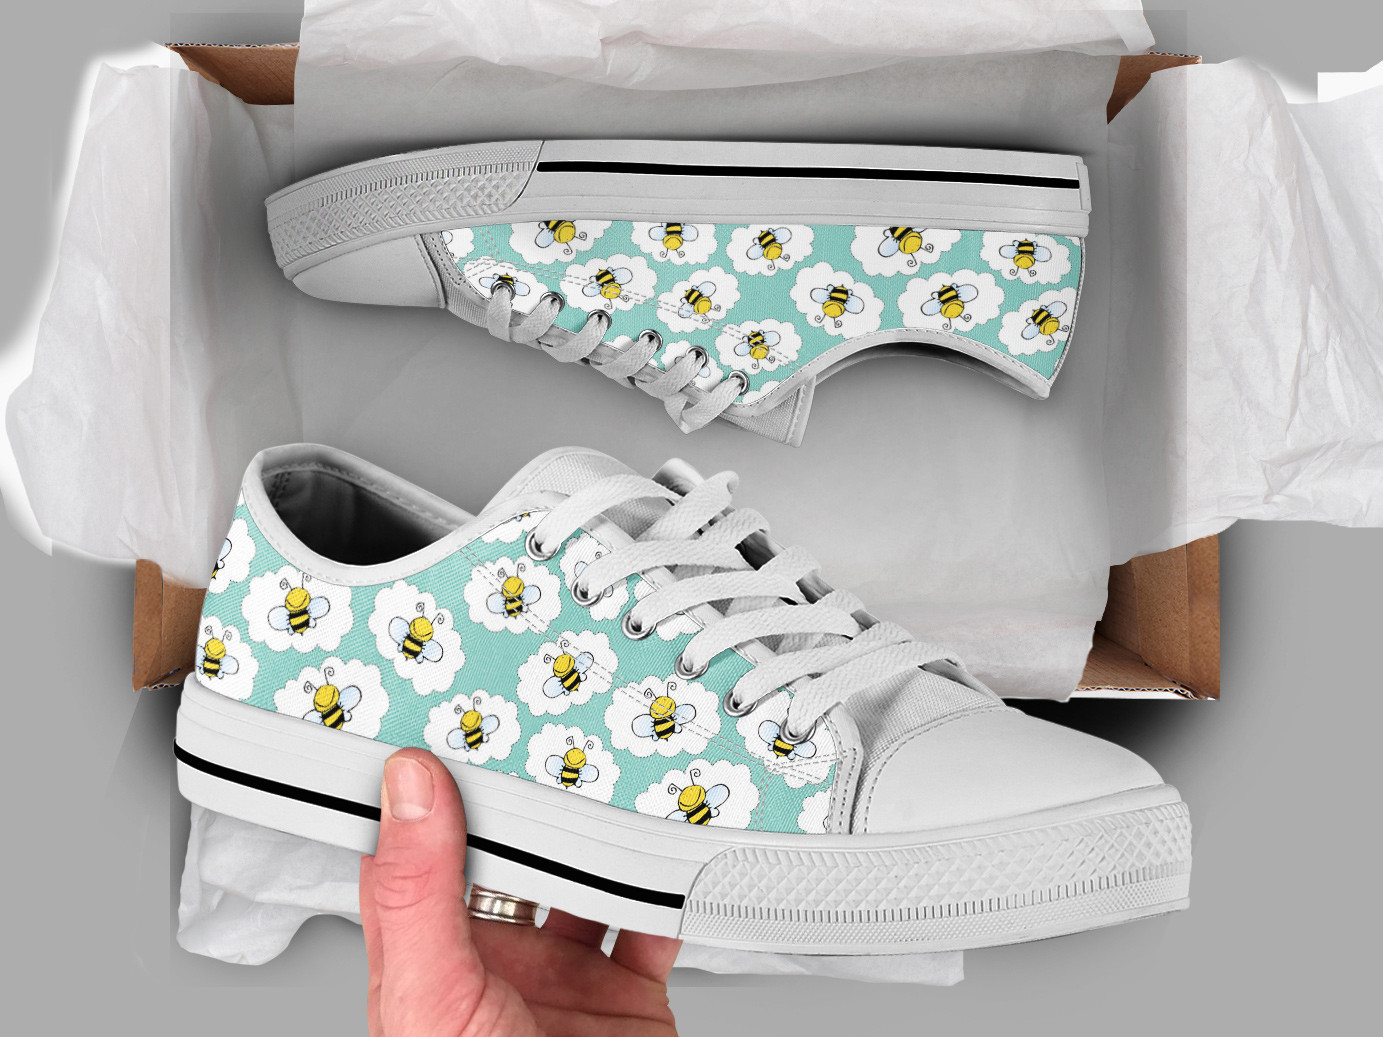 Bee Womens Shoes | Custom Low Tops Sneakers For Kids & Adults